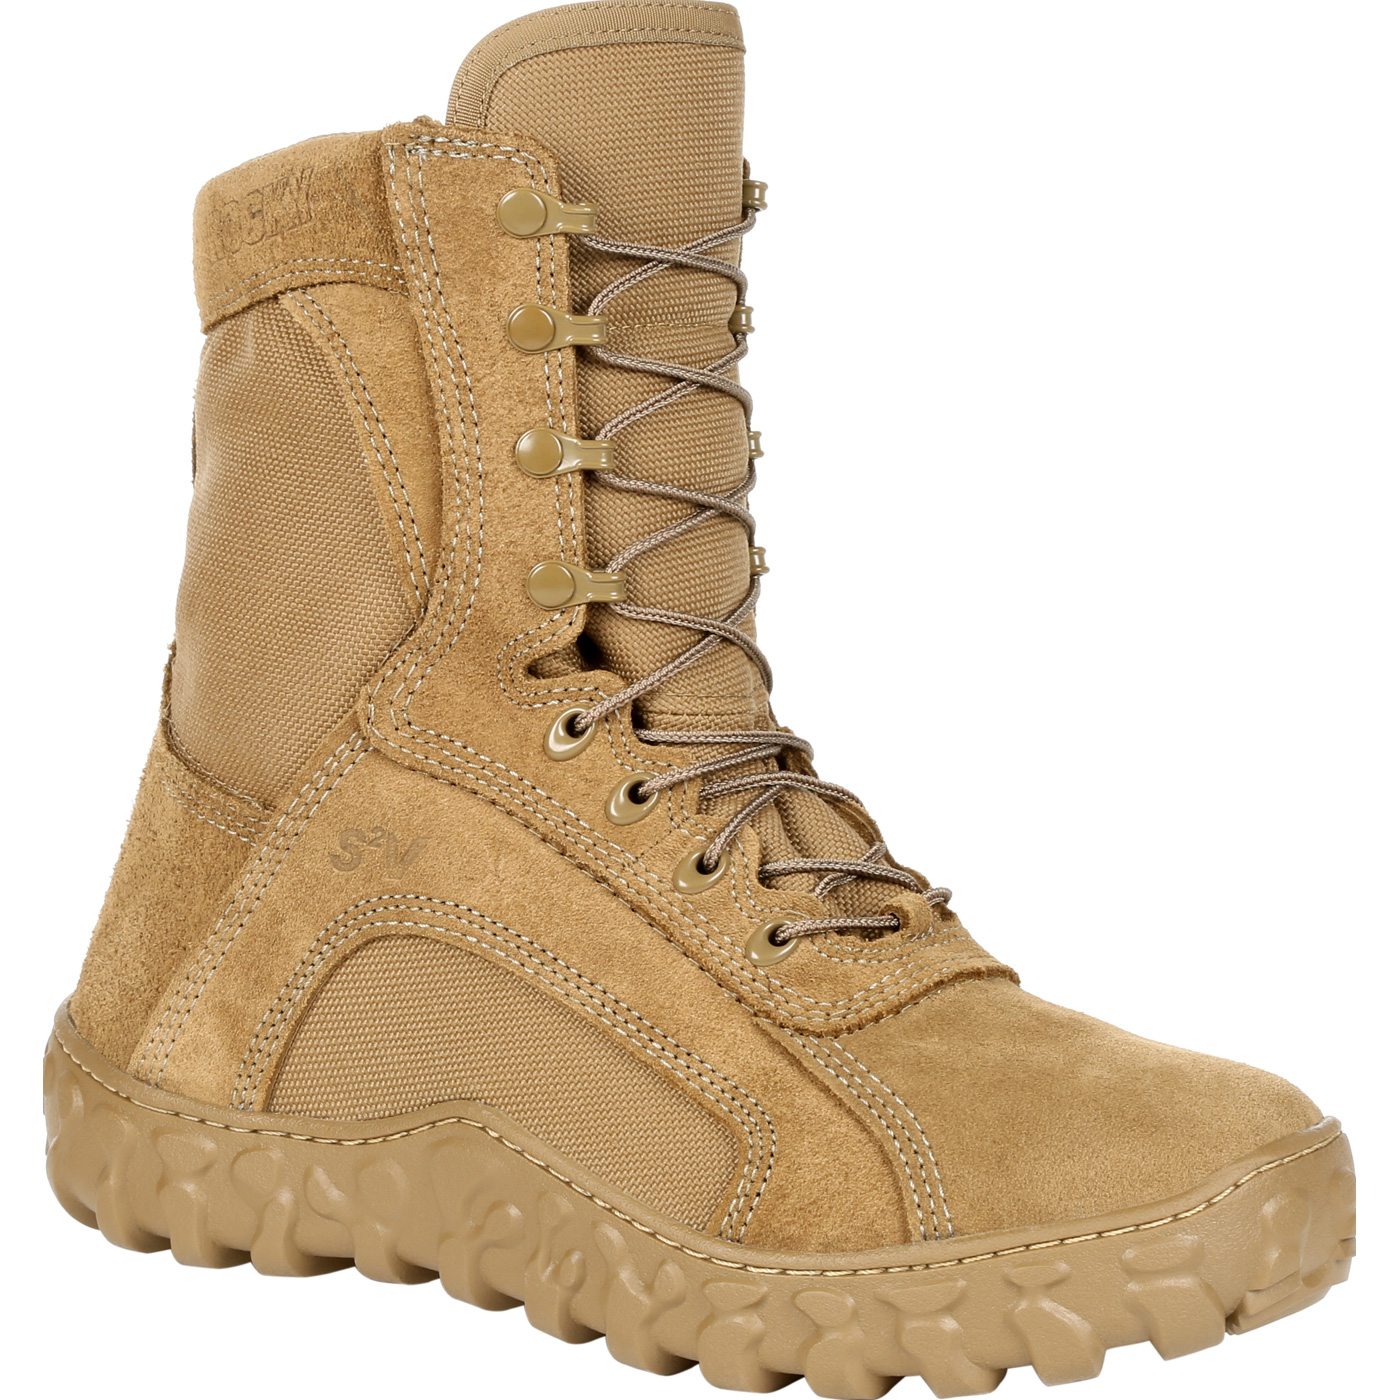 Rocky S2V Waterproof Insulated Military Duty Boot, FQ00104-1